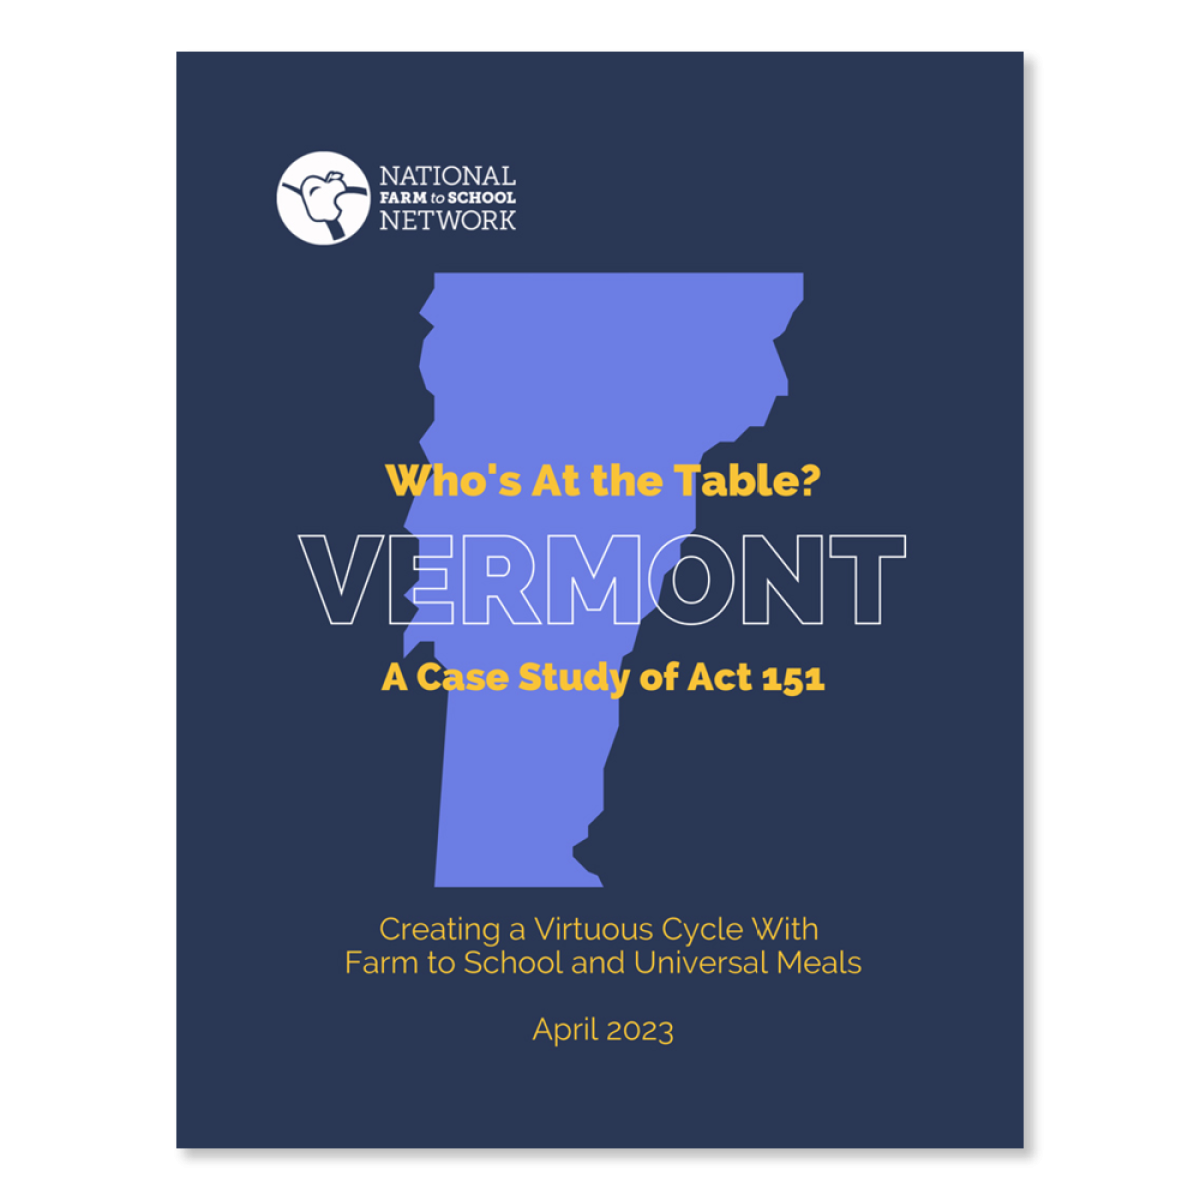 The cover of the Farm to School and Universal Meals in Vermont: A Case Study of Act 151 case study